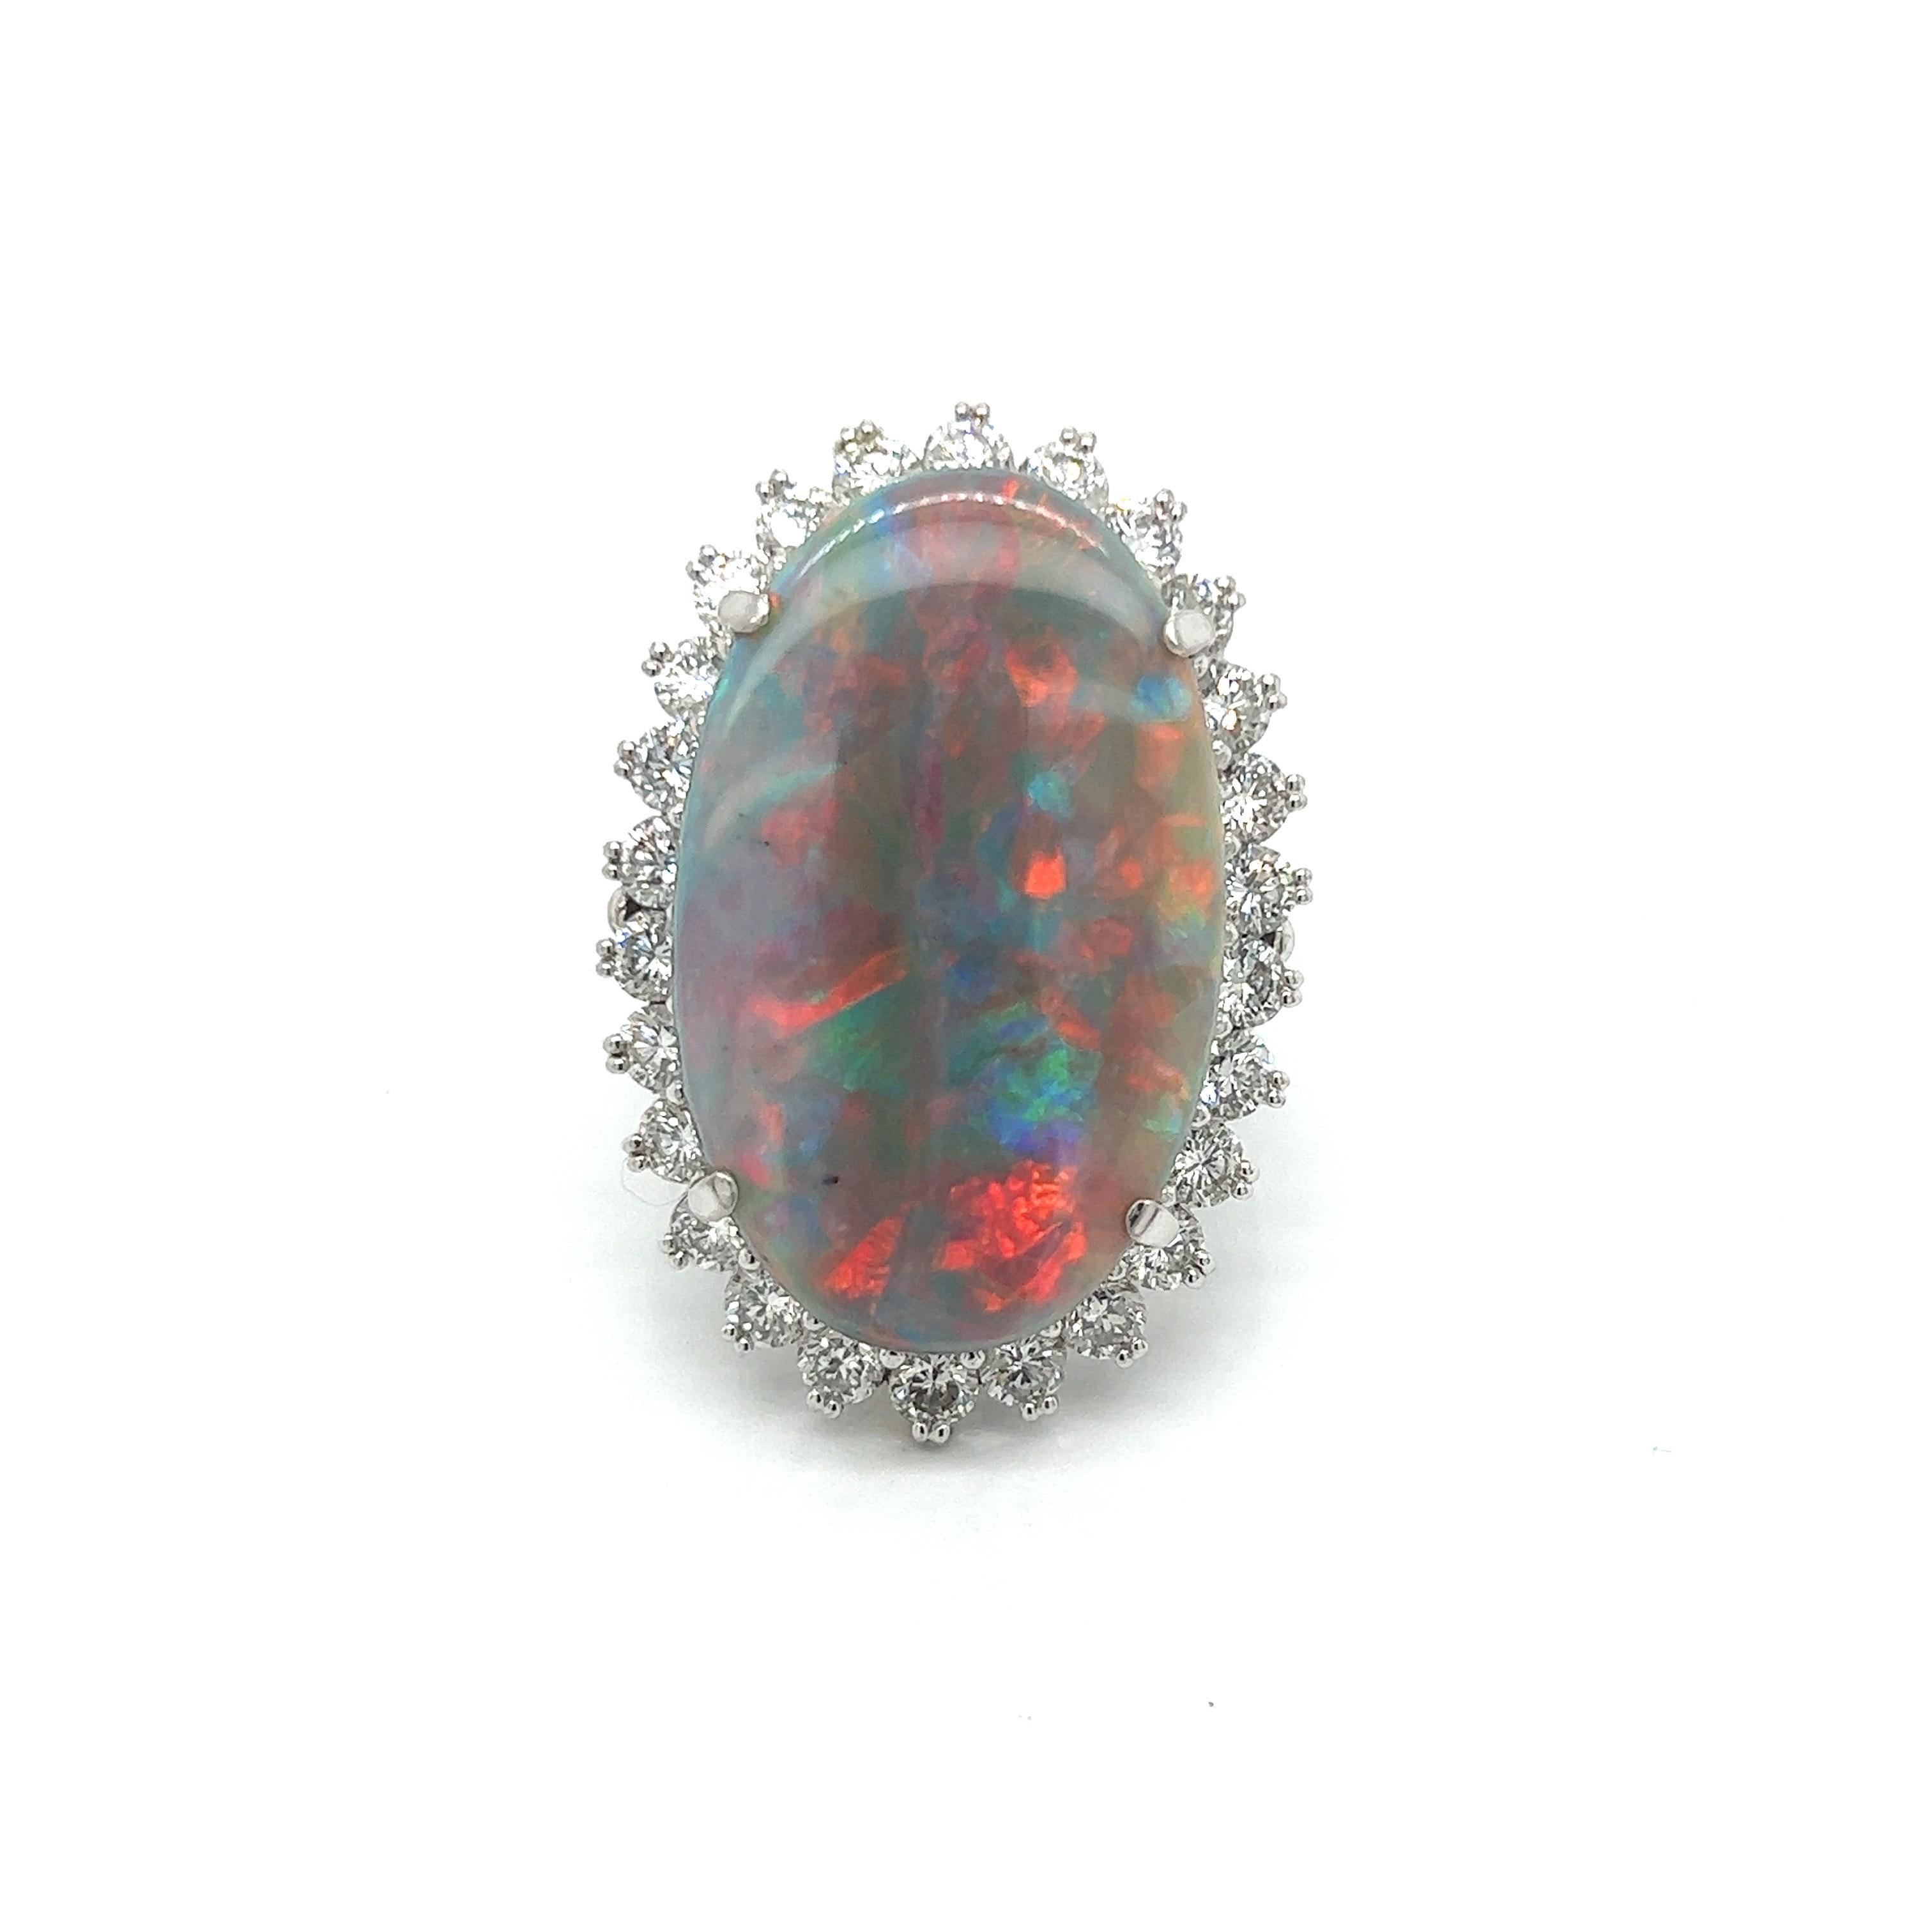 This exquisite ring features a large 15.28 carat cabochon oval opal. The opal is surrounded by A halo of twenty six round diamonds totaling 2.61 ctw, The diamonds are VS2-SI1 in clarity and H-I in color.  Mounted in platinum.  Total weight is 23.86